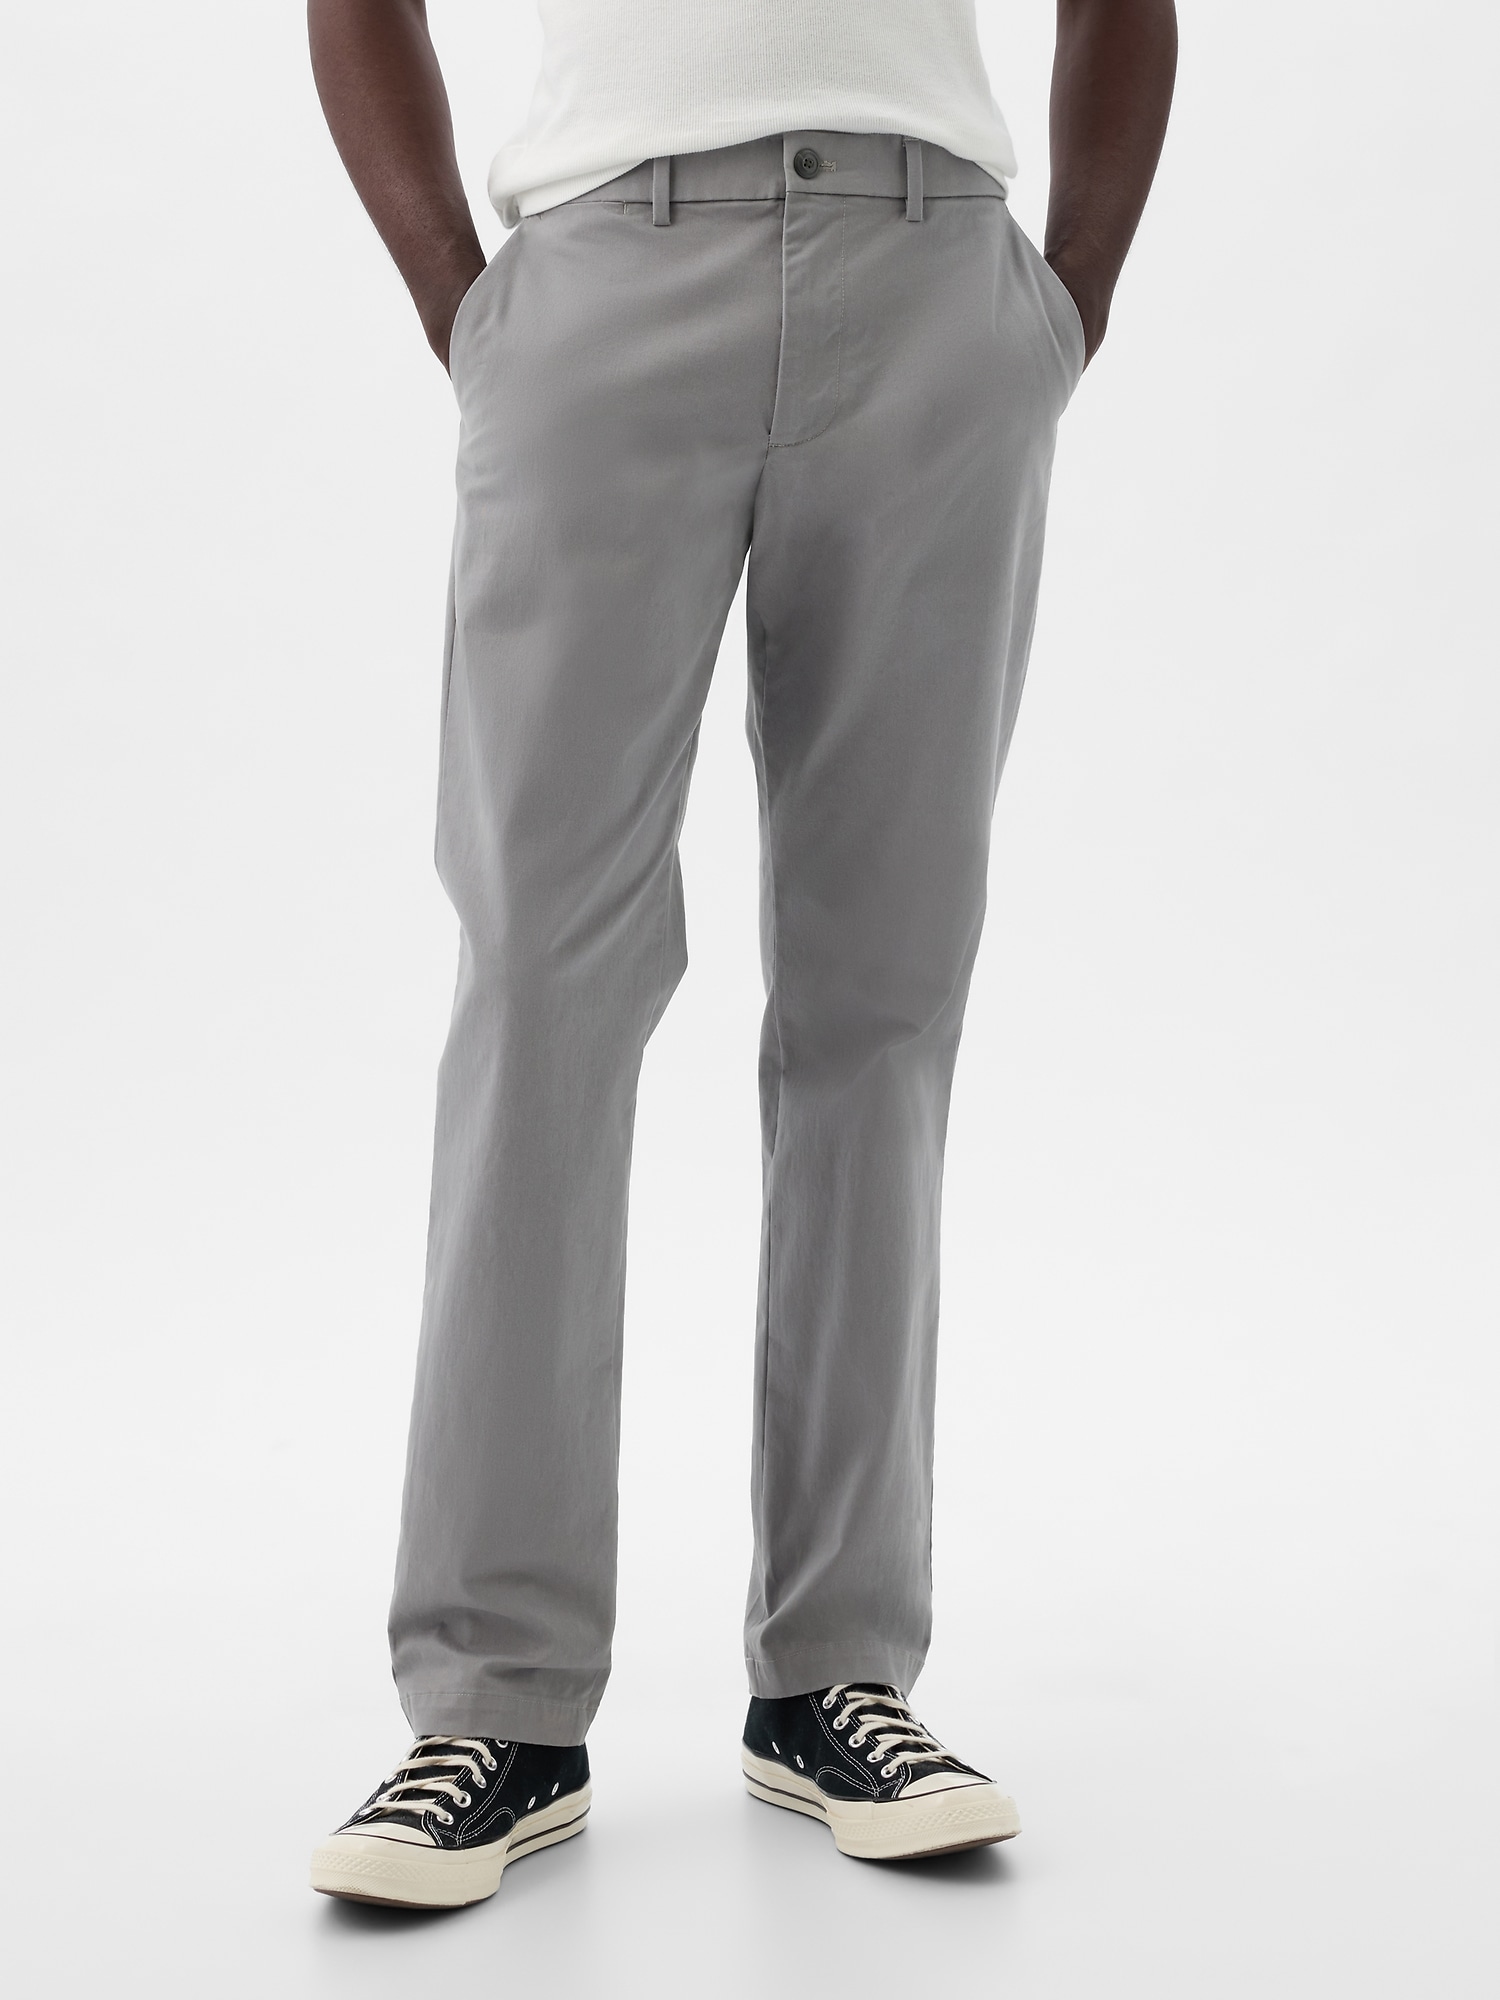 Original Khakis in Straight Fit with GapFlex